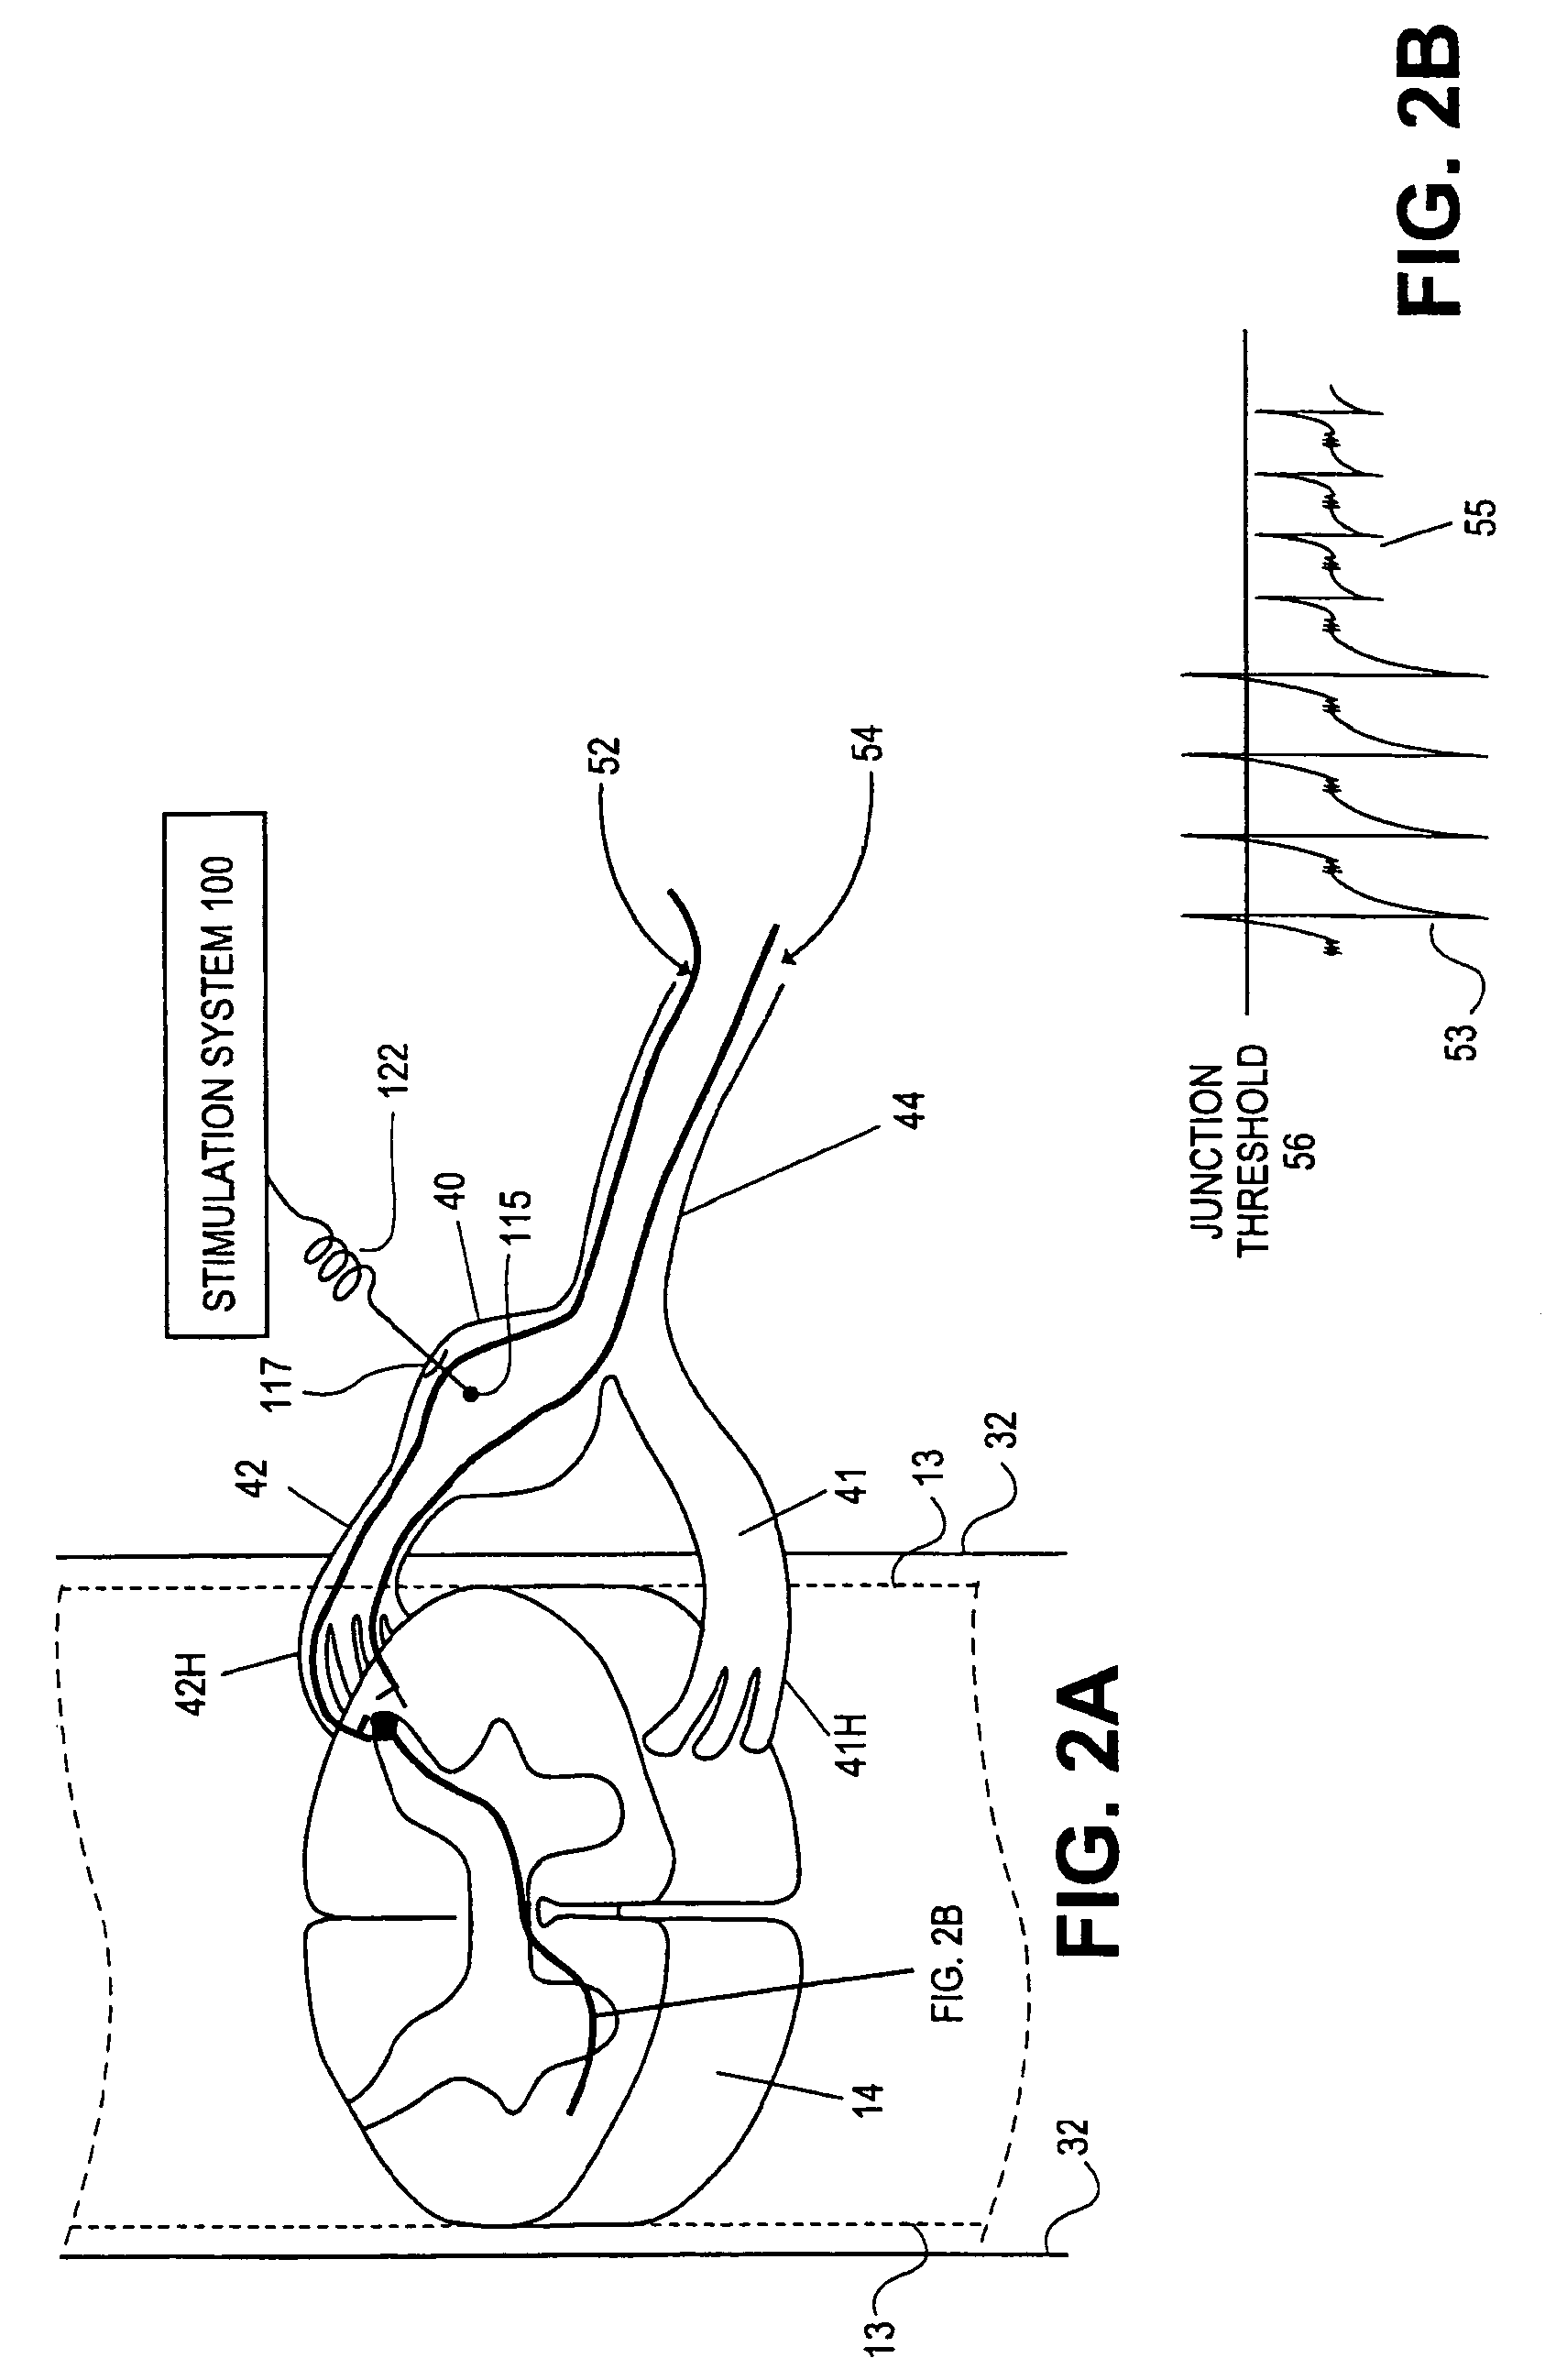 Methods and systems for modulating neural tissue